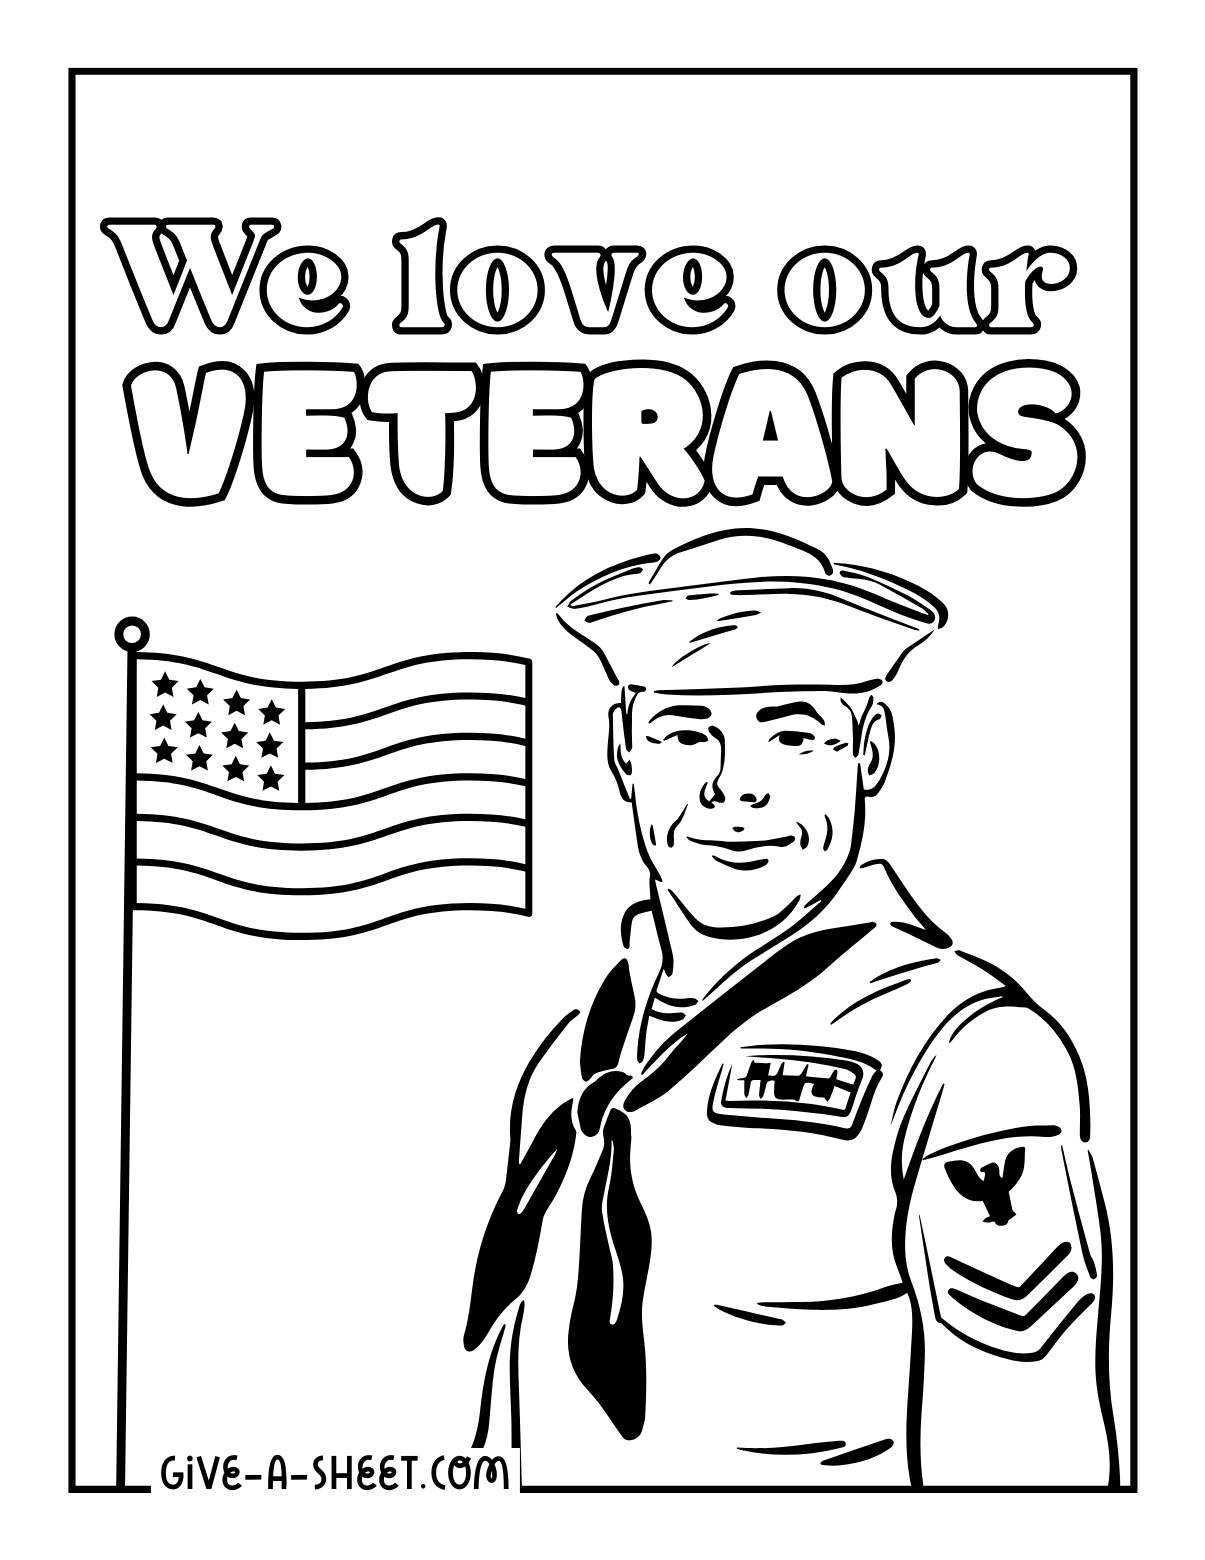 Navy showing patriotism on veterans day coloring page.